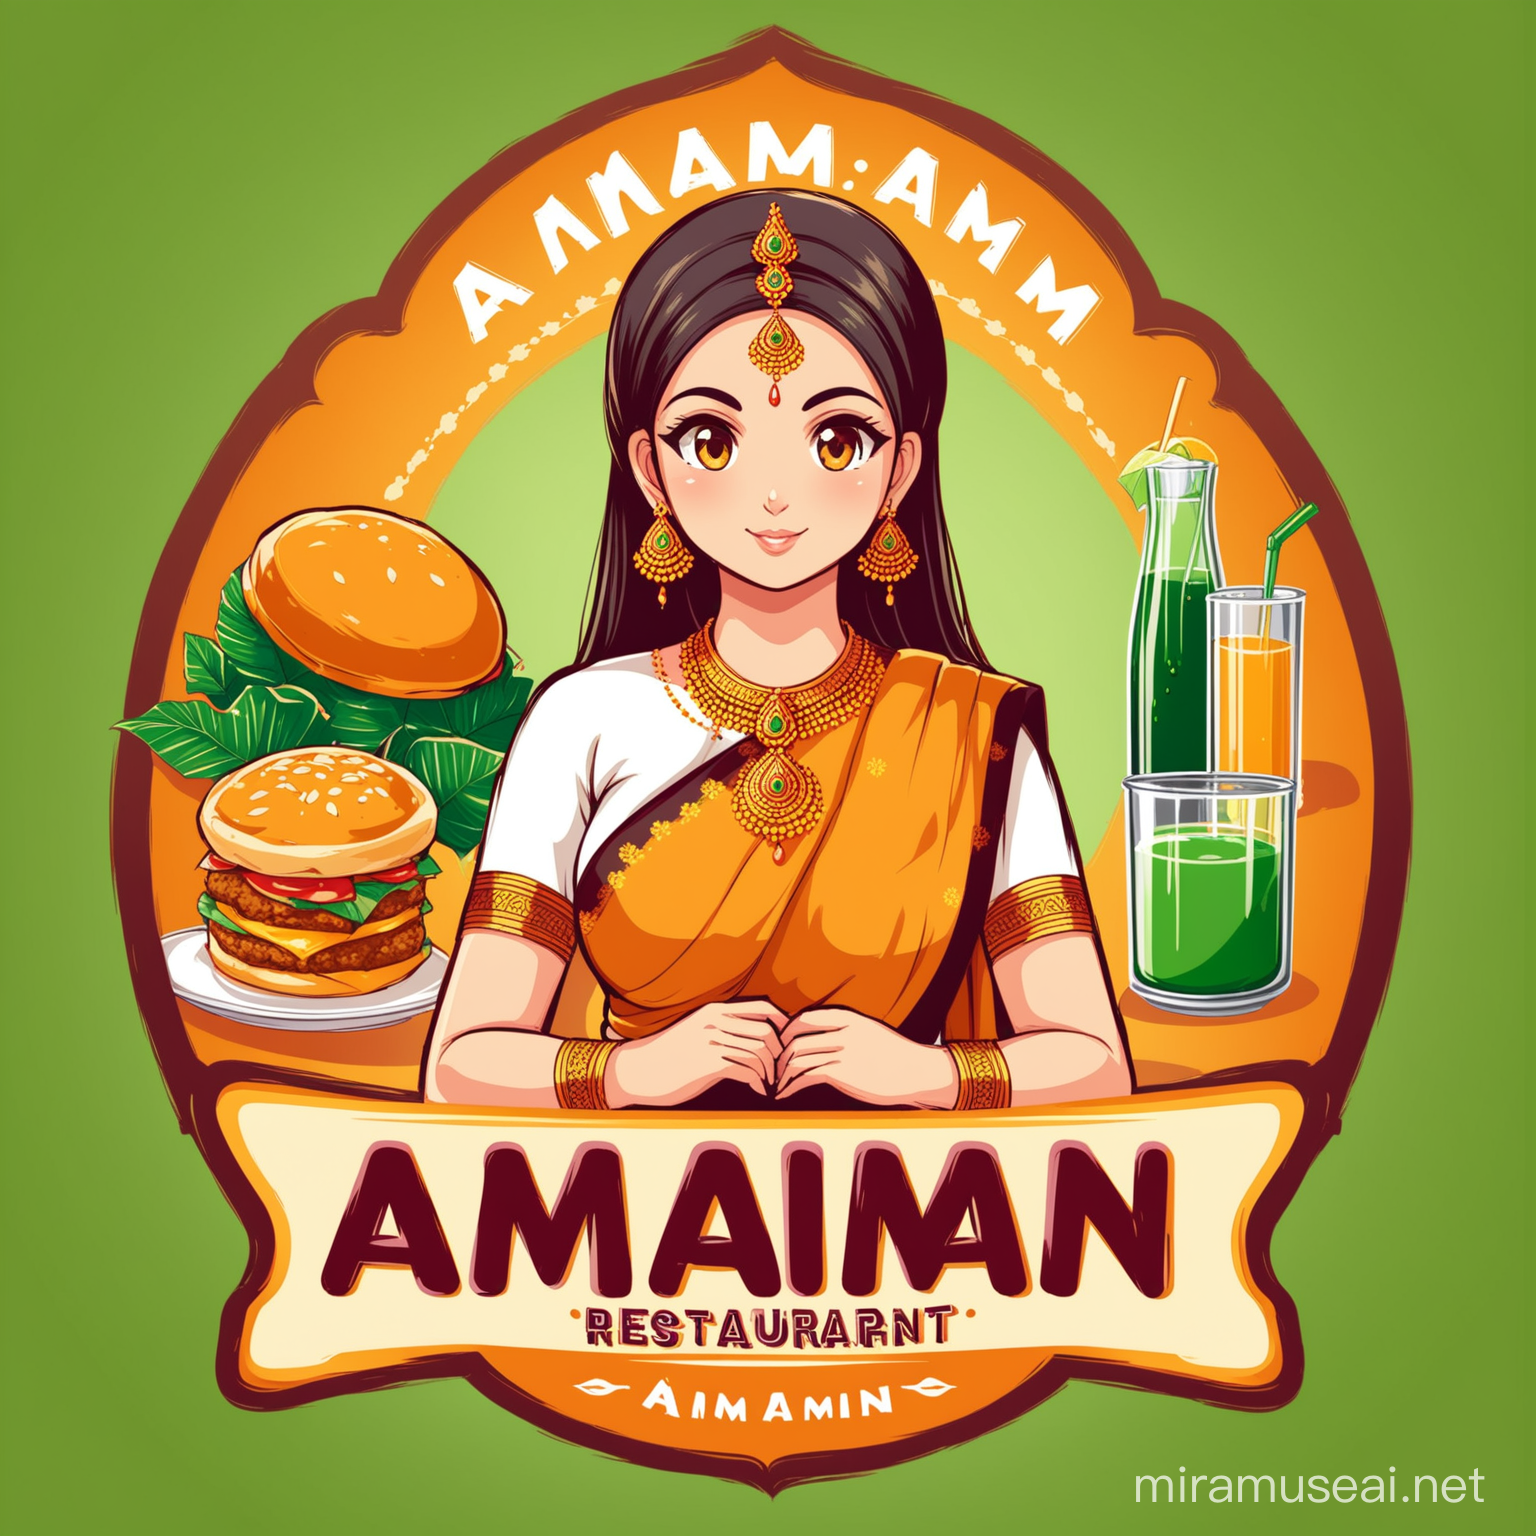 traditional and modern food items Along with juices and nostalgia items  create a restaurent logo where women wearing a saree and name the logo as "AMMAM" caption "THE NOSTALGIA"